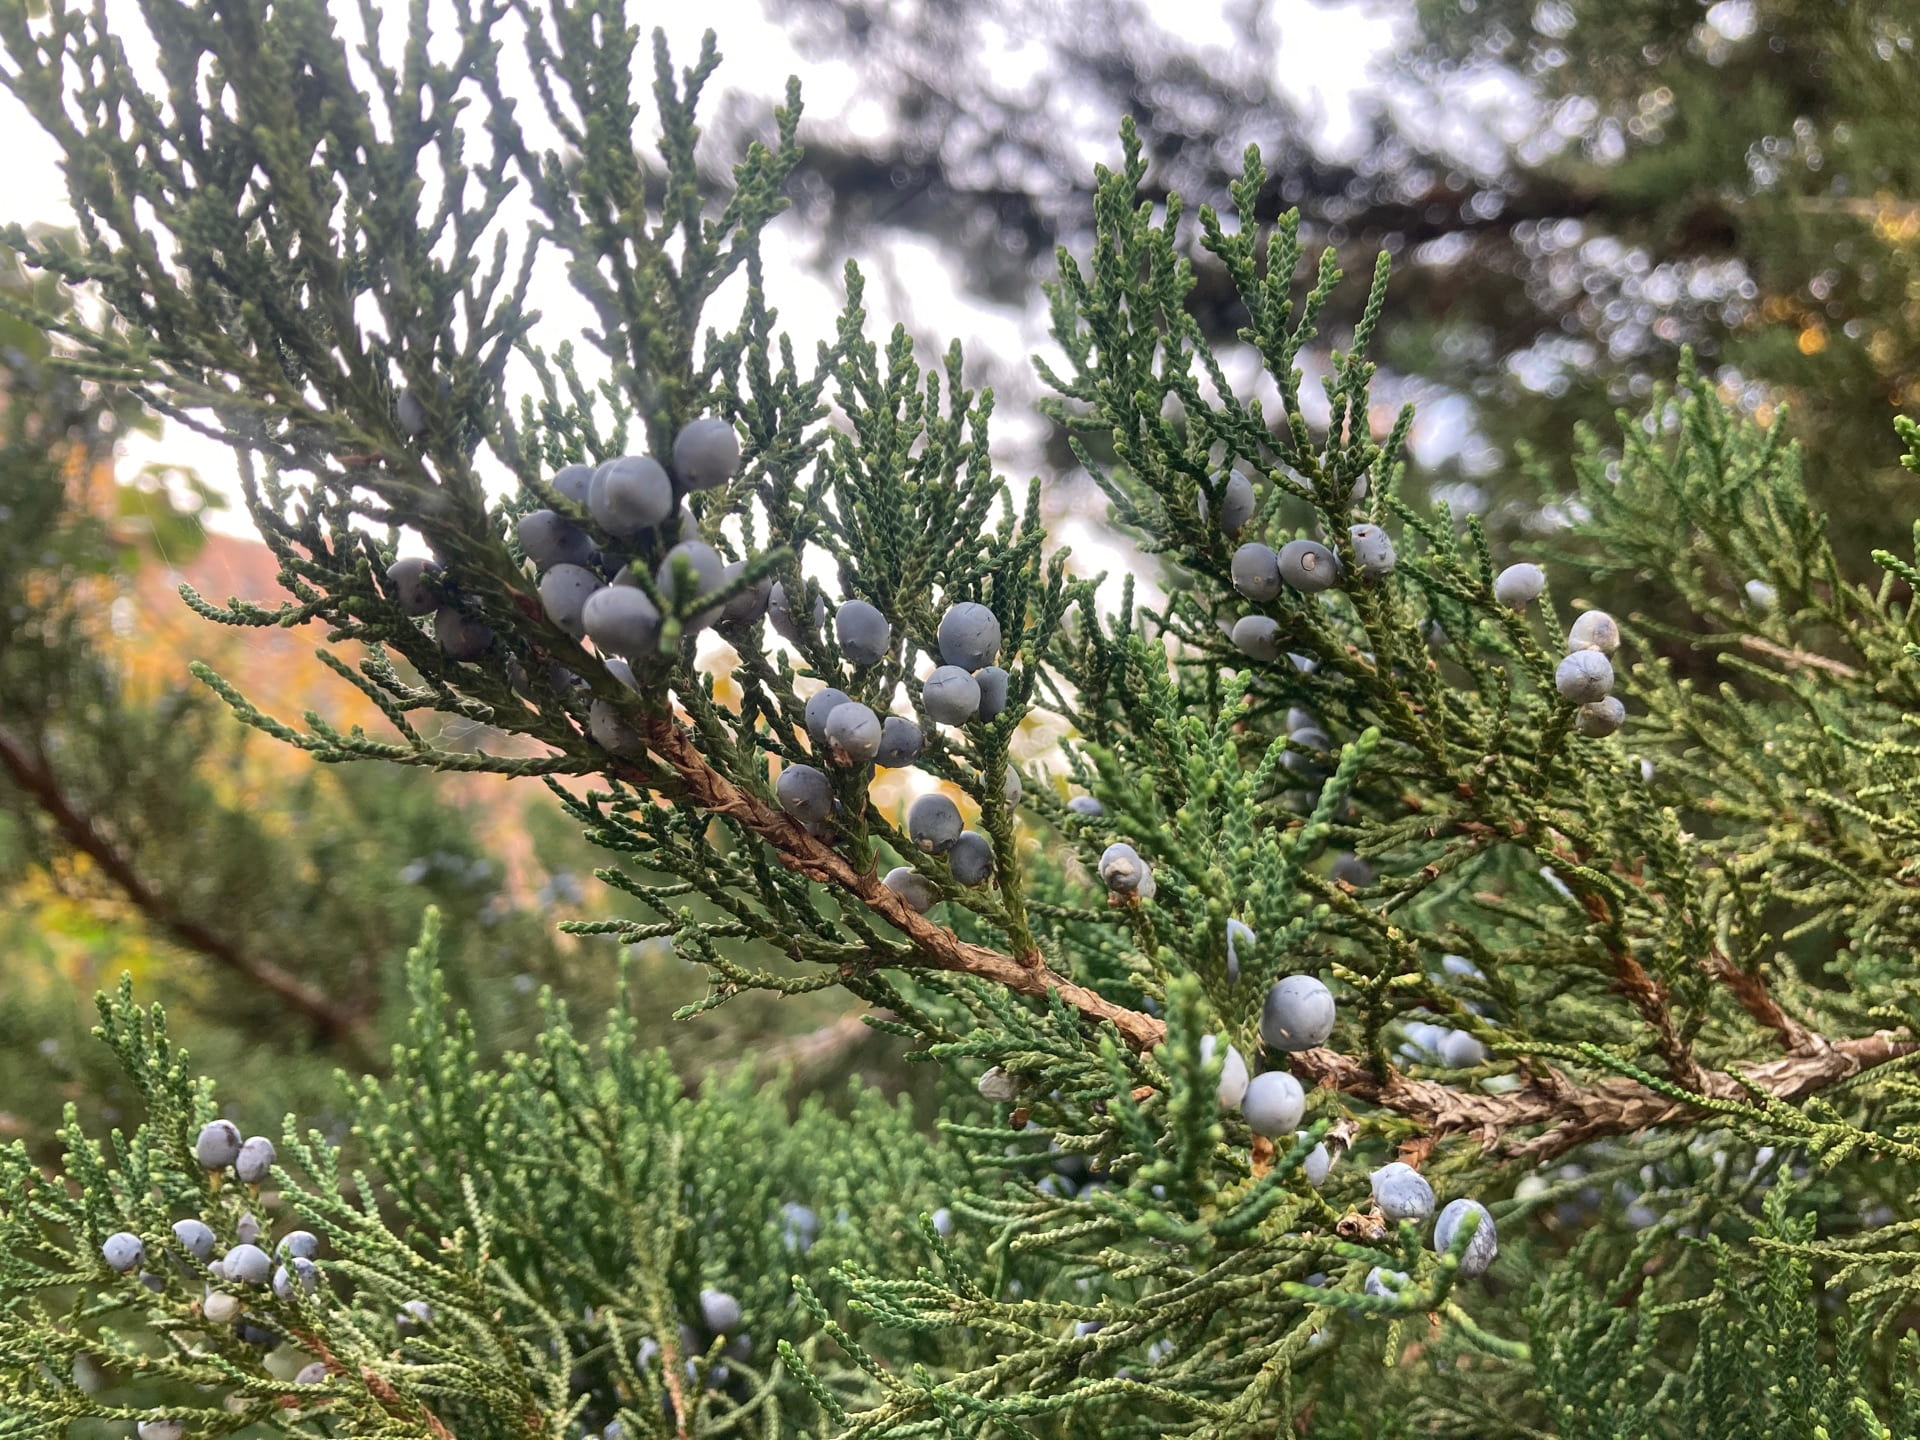 Juniperus virginiana fruit look like blue-grey berries, but they are actually cones.